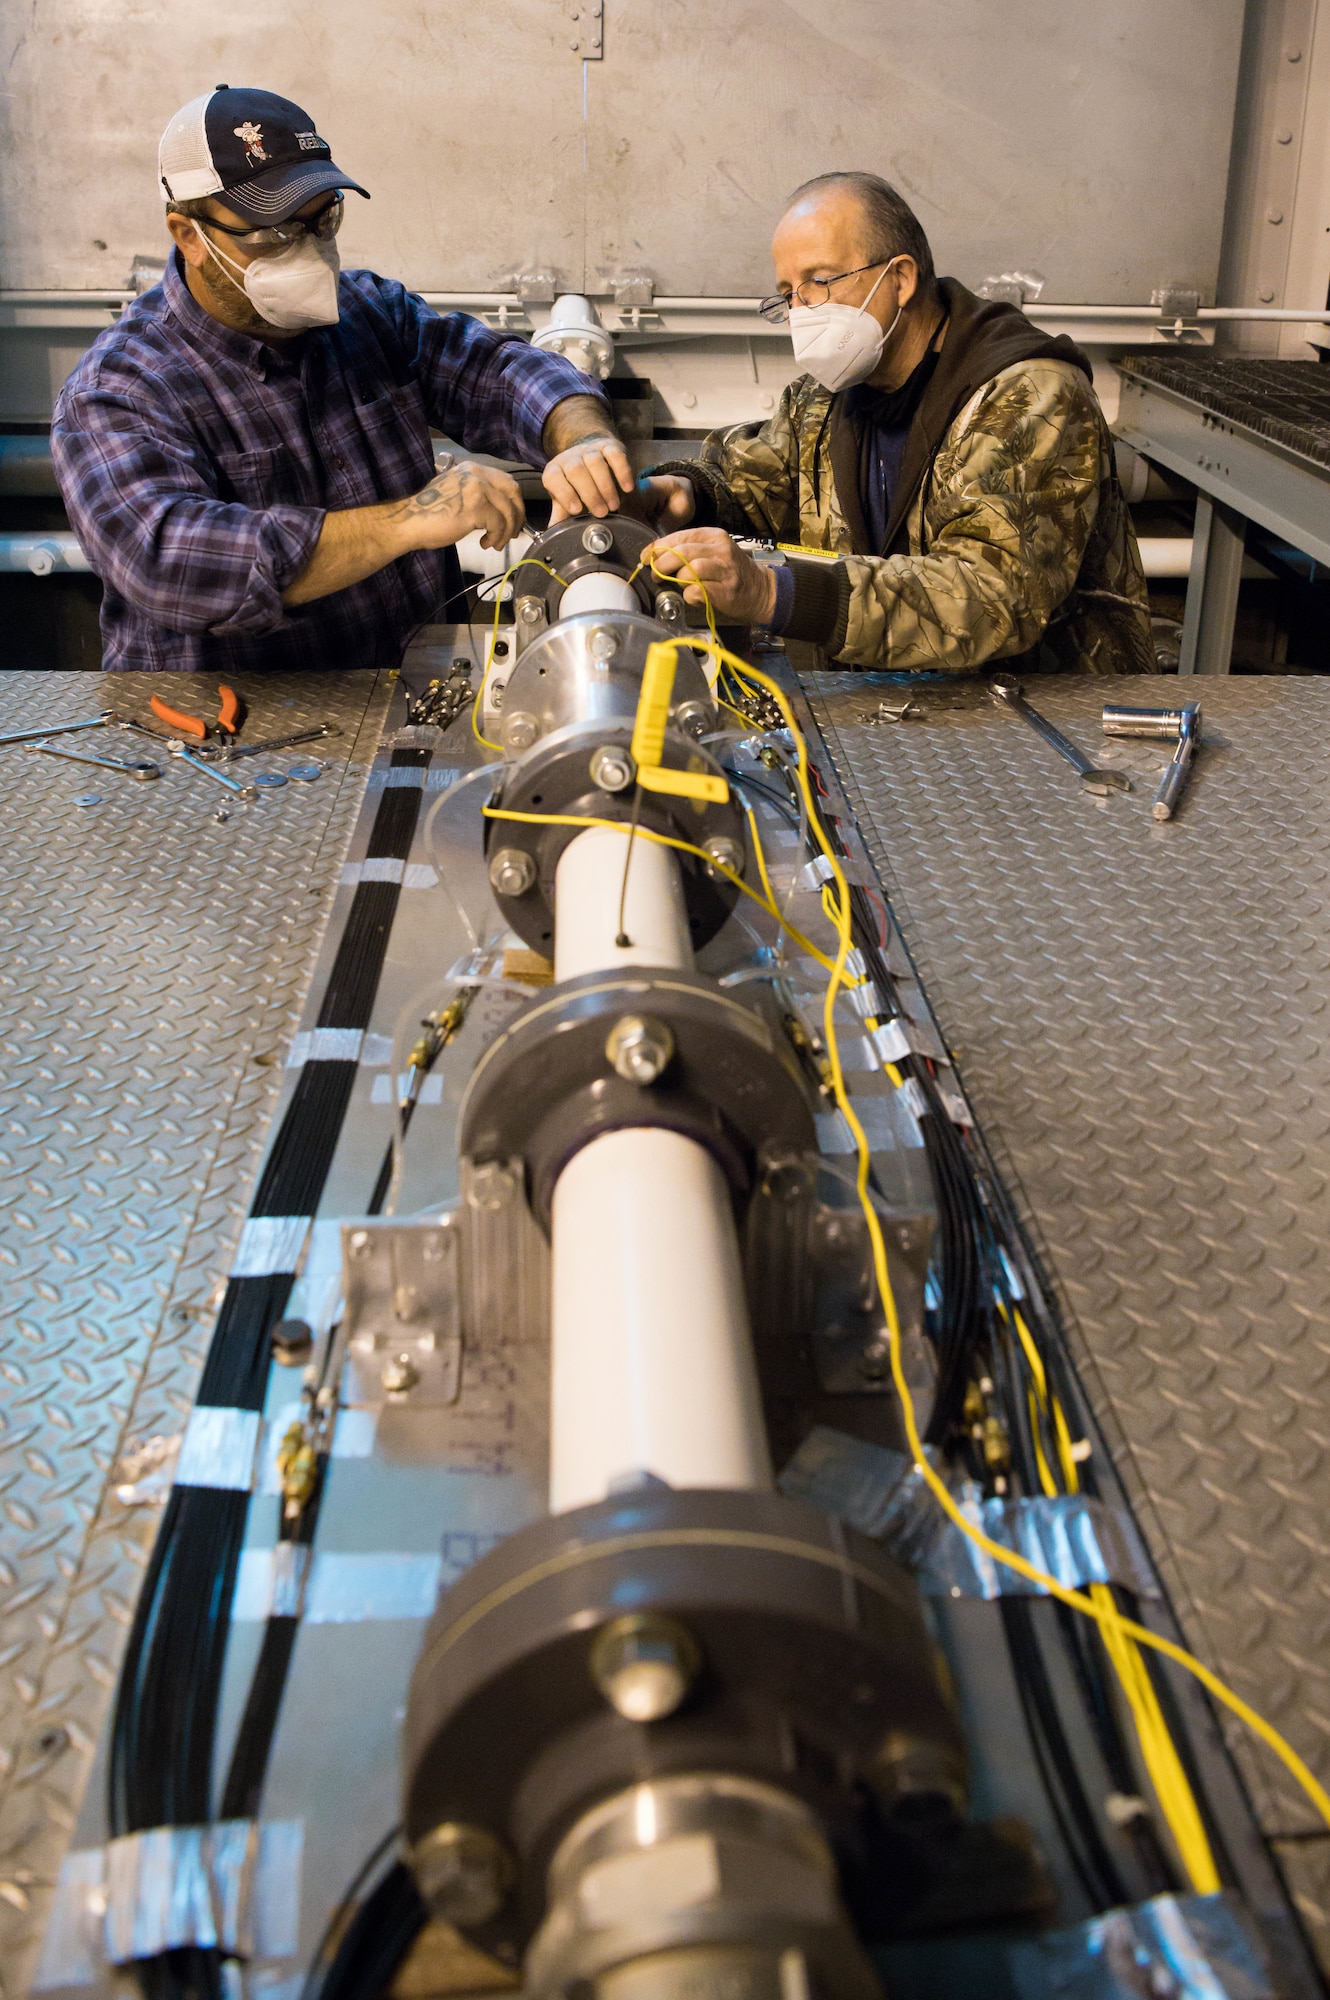 Alan Womack, left, machinist lead, and Jeff Tucker, machinist, install the second of two nozzles onto a test apparatus in the Sea Level 2 Test Cell, Dec. 17, 2020, at Arnold Air Force Base, Tenn. An Arnold Engineering Development Complex test team was researching the acoustic properties of two different nozzles. (U.S. Air Force photo by Jill Pickett)